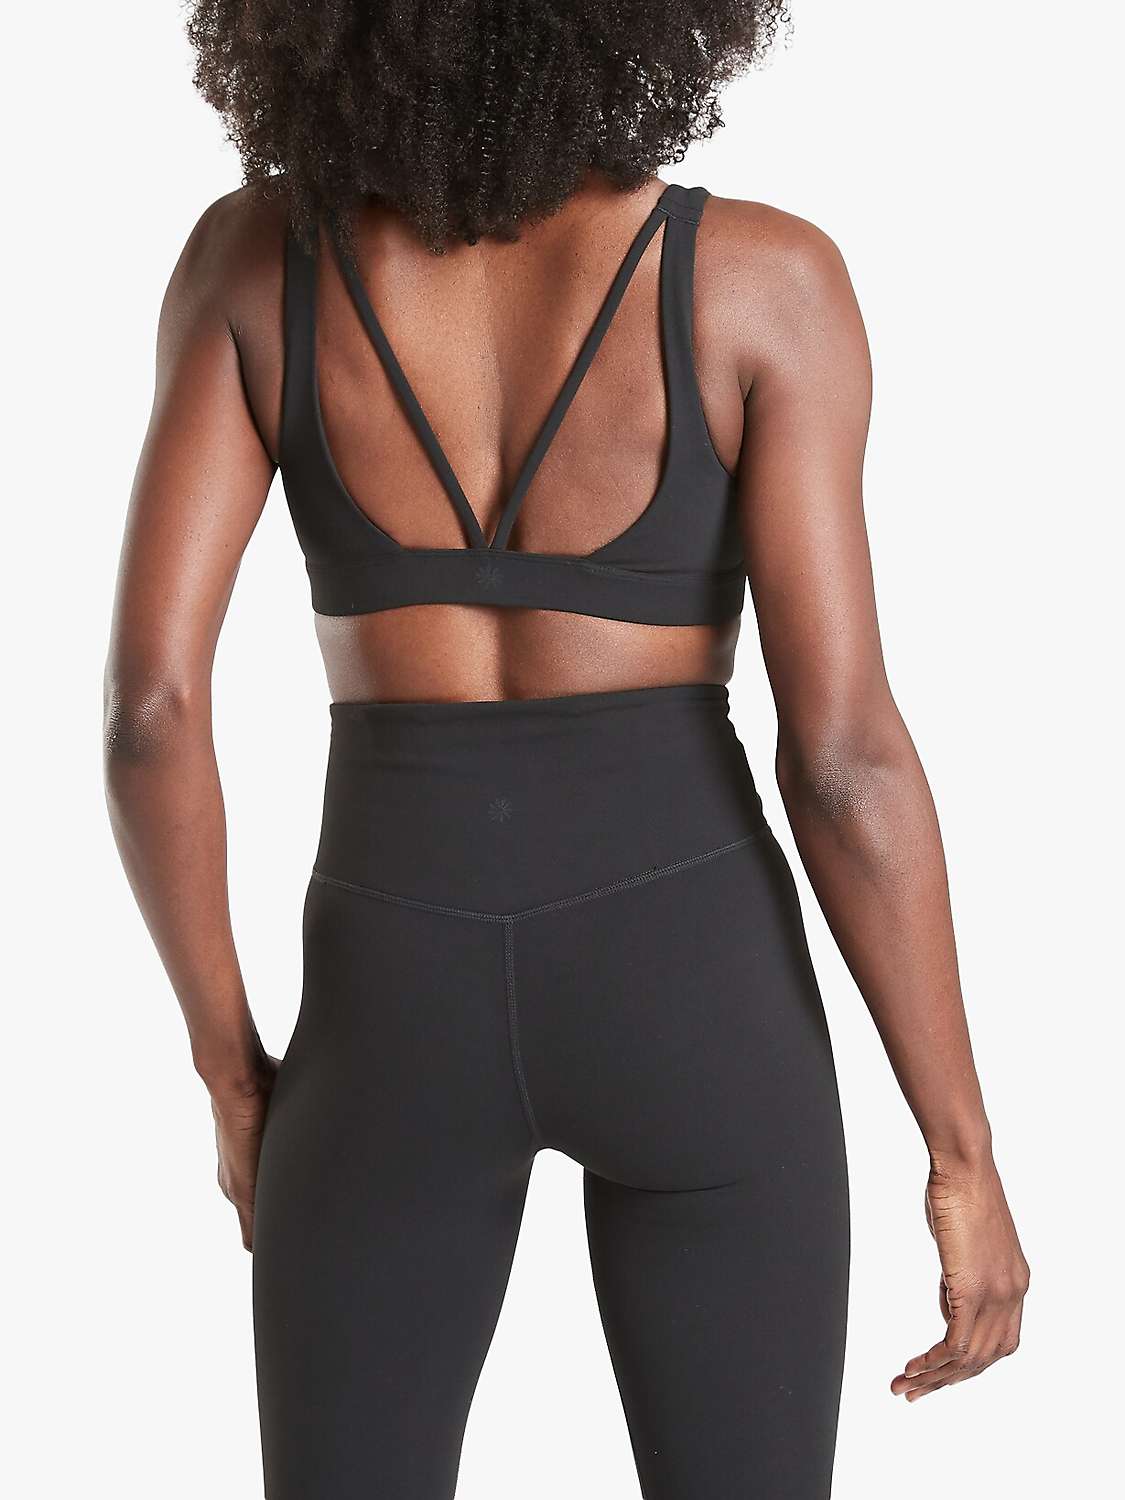 Buy Athleta Exhale Powervita A-C Cup Sports Bra Online at johnlewis.com